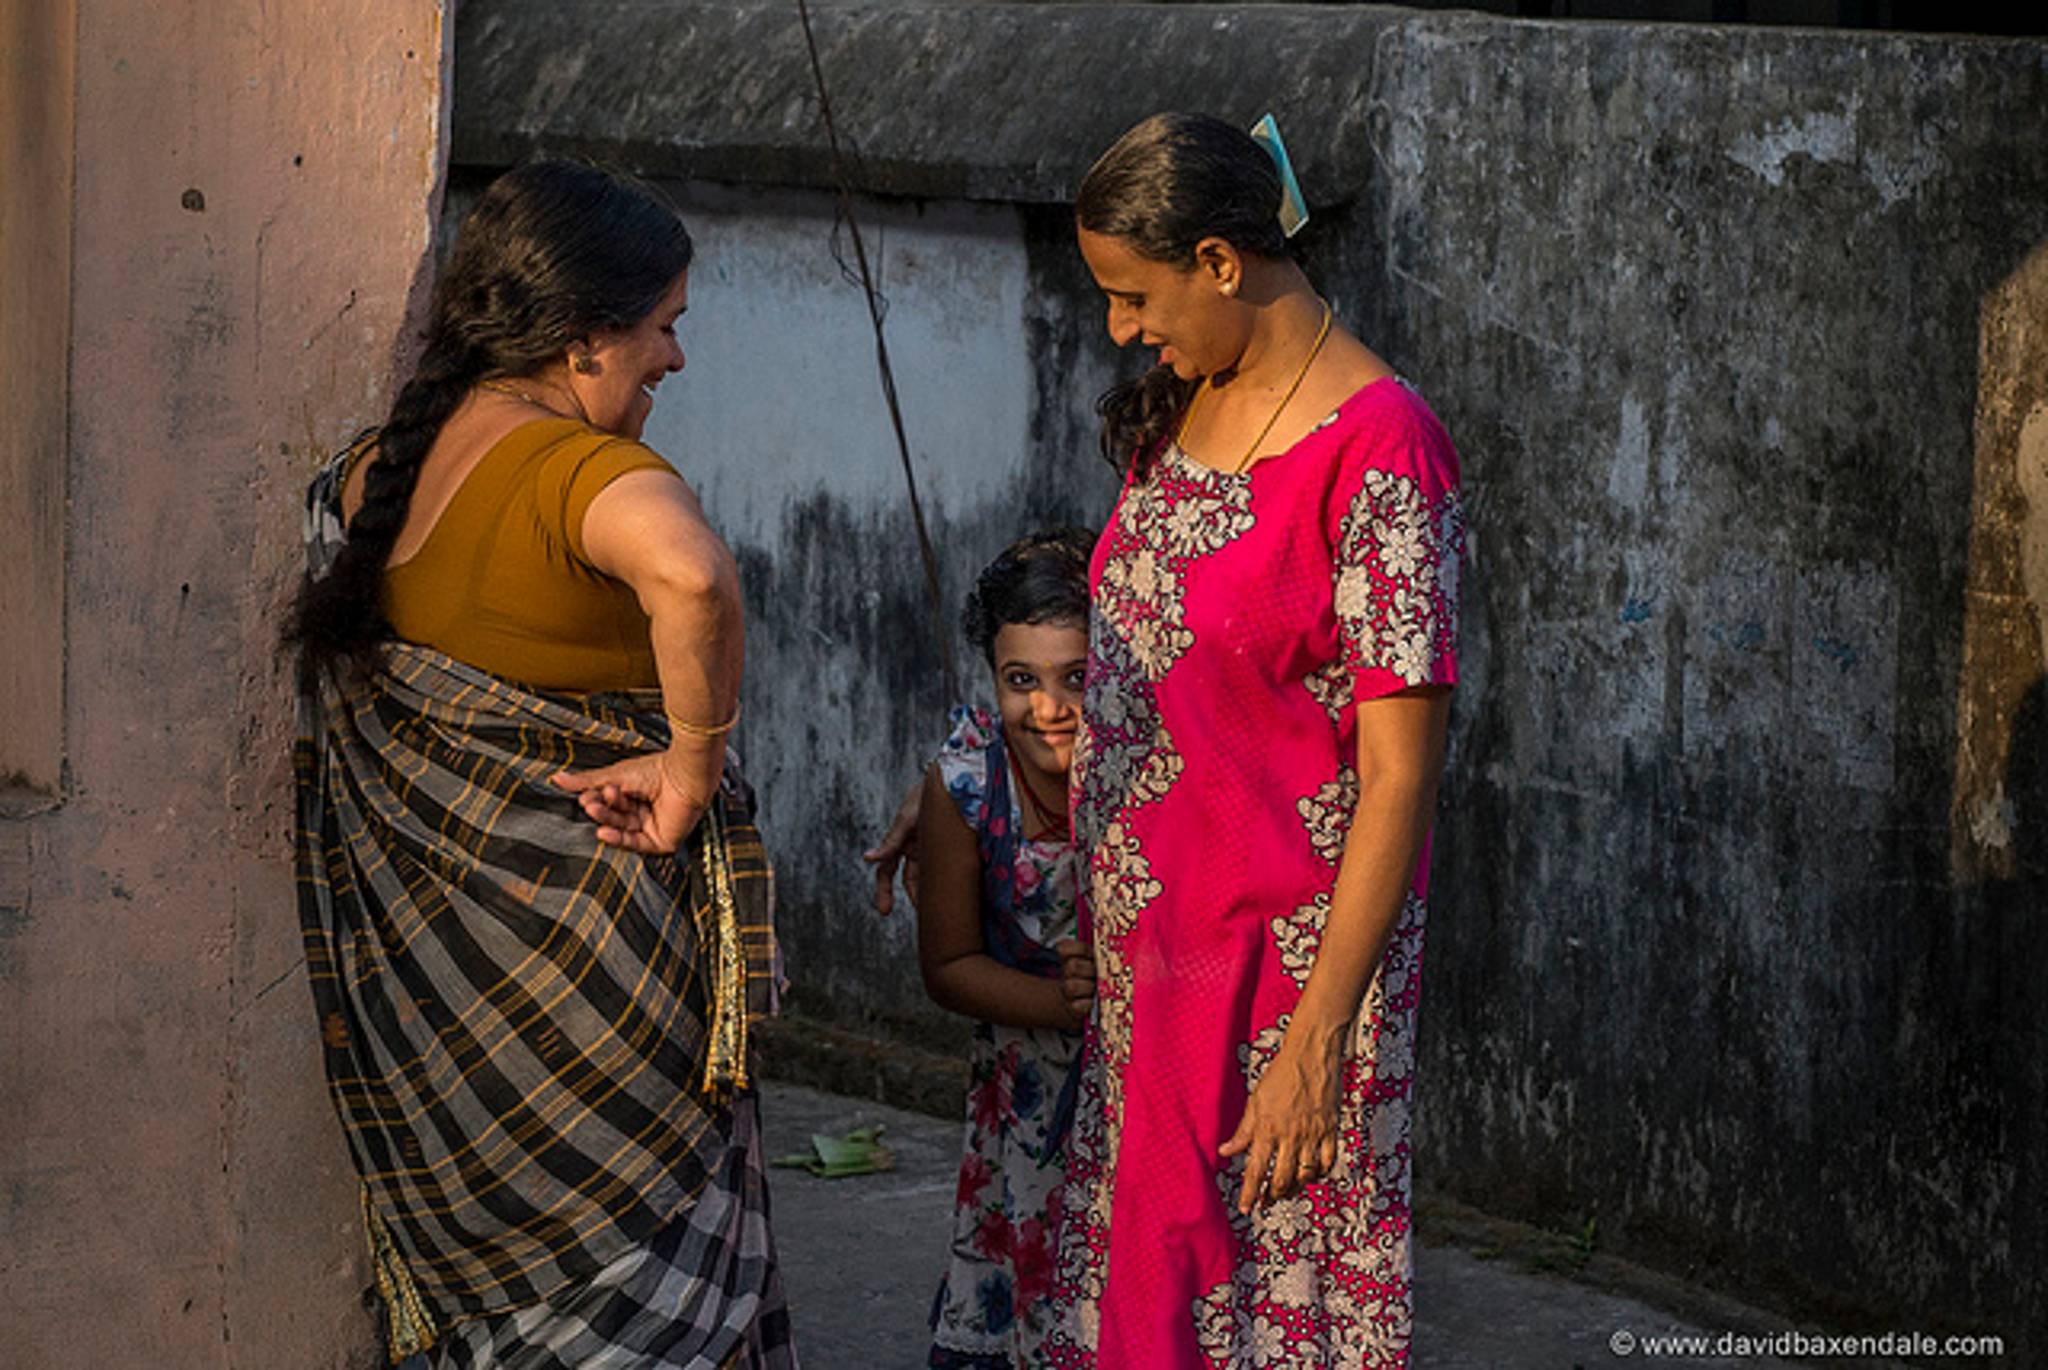 CycleTel is destigmatising family planning in India